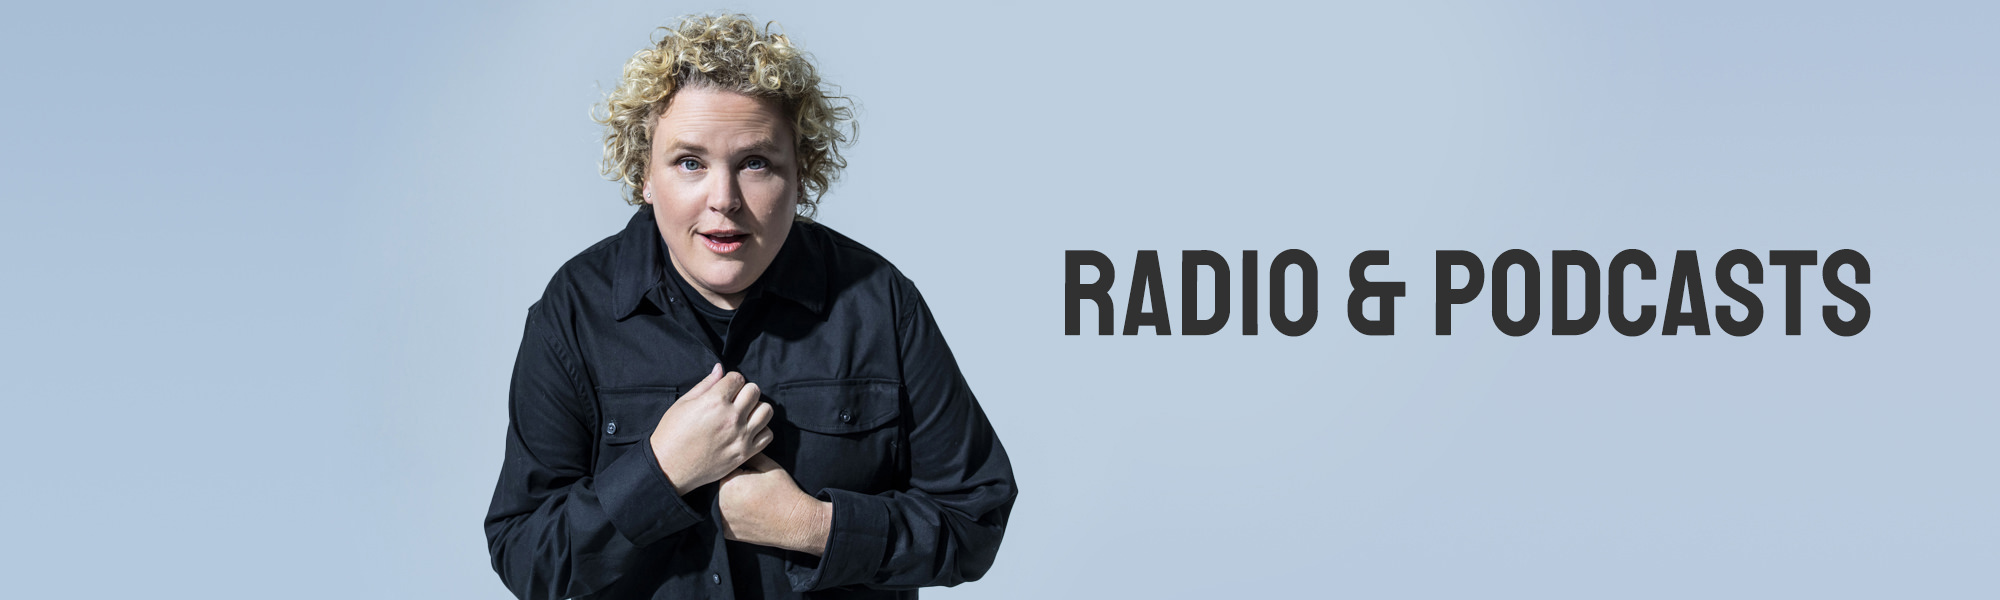 Comedian Fortune Feimster wearing a dark jacket in front of a pale blue background.